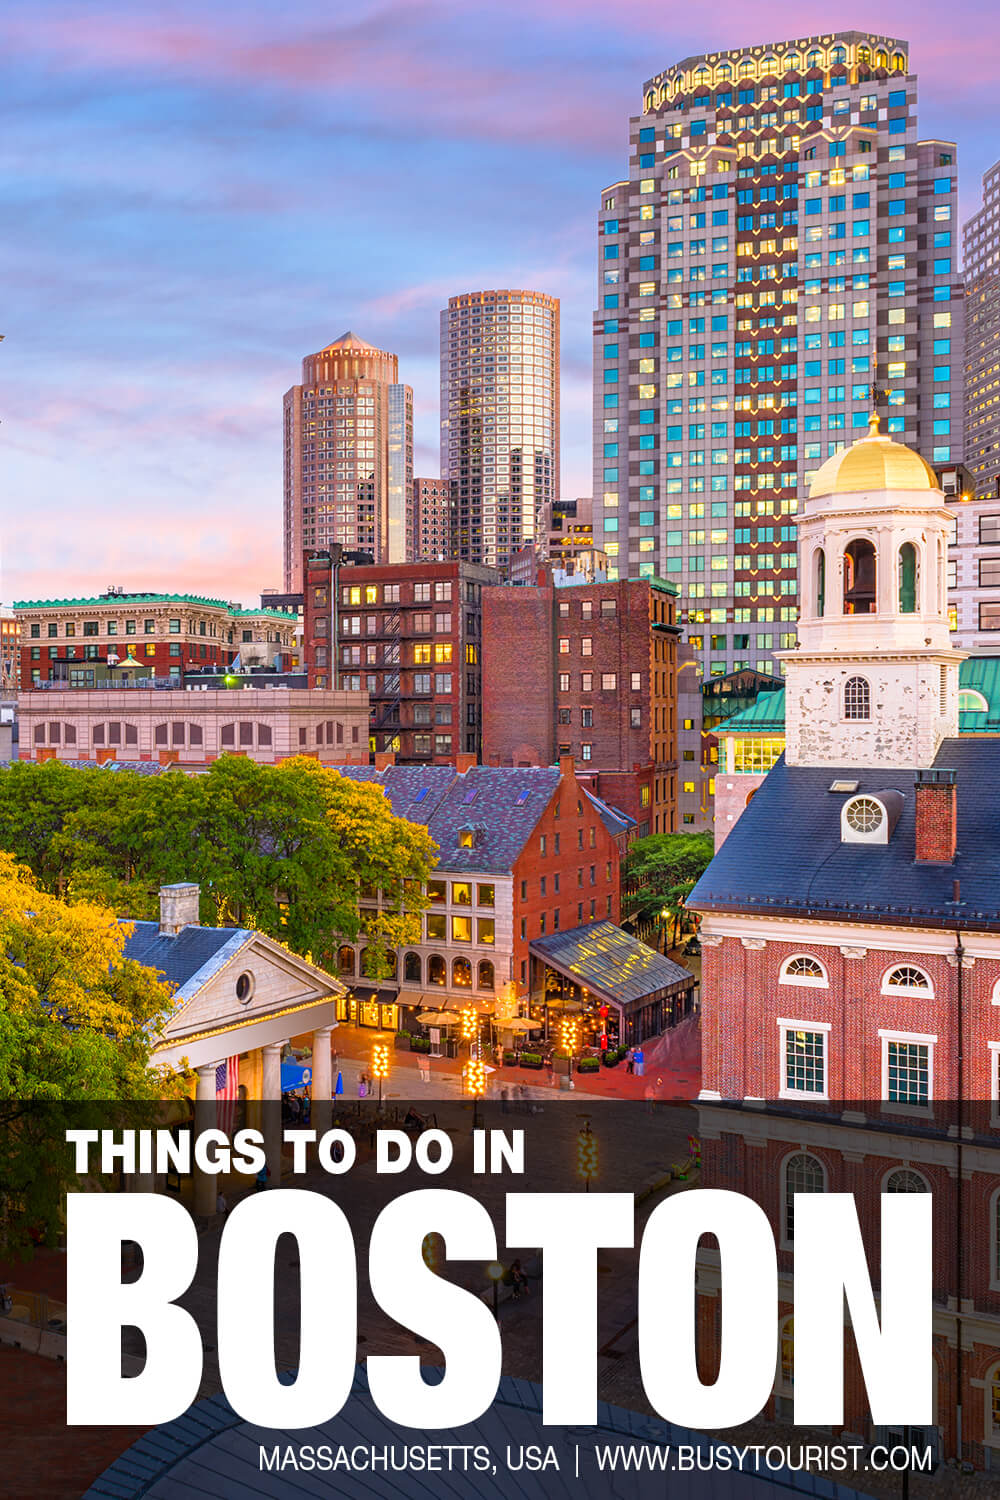 33 Best And Fun Things To Do In Boston Ma Attractions And Activities